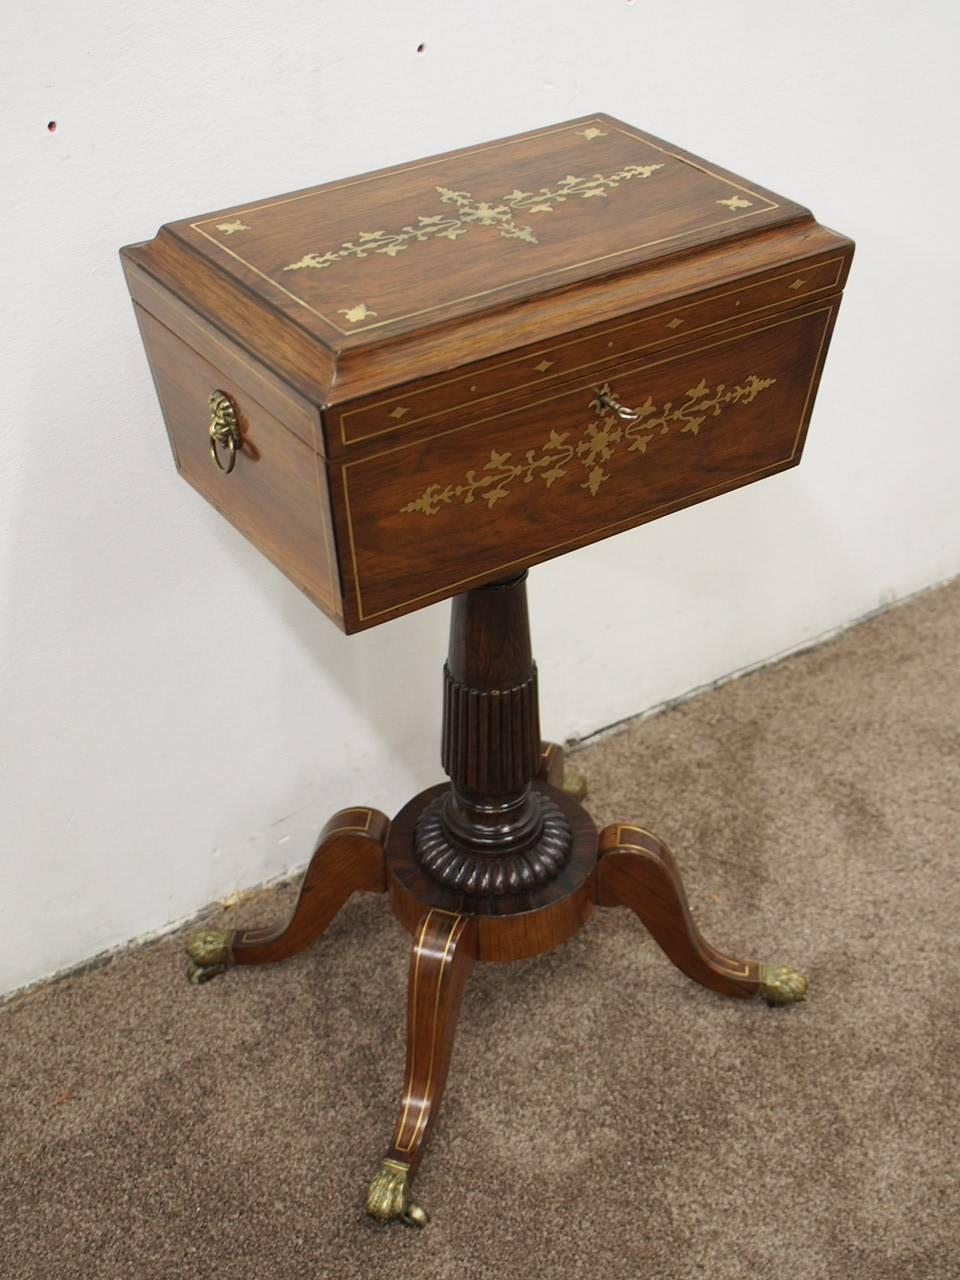 Rare Regency rosewood and brass inlaid teapoy on stand, circa 1815. The sarcophagus shaped teapoy has brass beading and an elaborate brass pattern to the centre and brass inlaid front. To the sides are cast brass lion mask head with pull rings. It